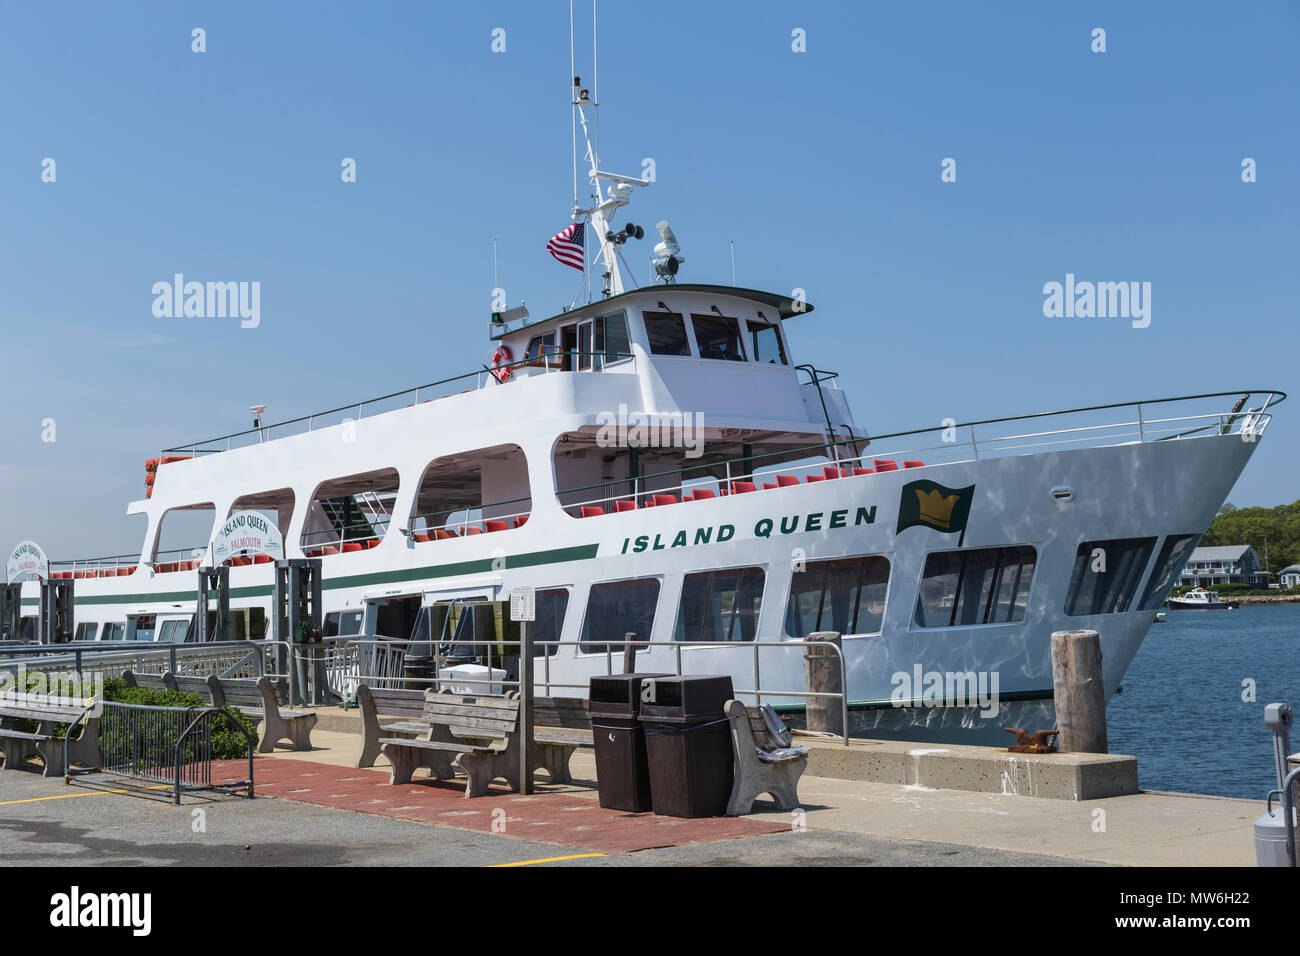 The Island Queen ferry from Martha's Vineyard to Falmouth docked in the harbor in Oak Bluffs, Massachusetts waiting for its next run. Stock Photo